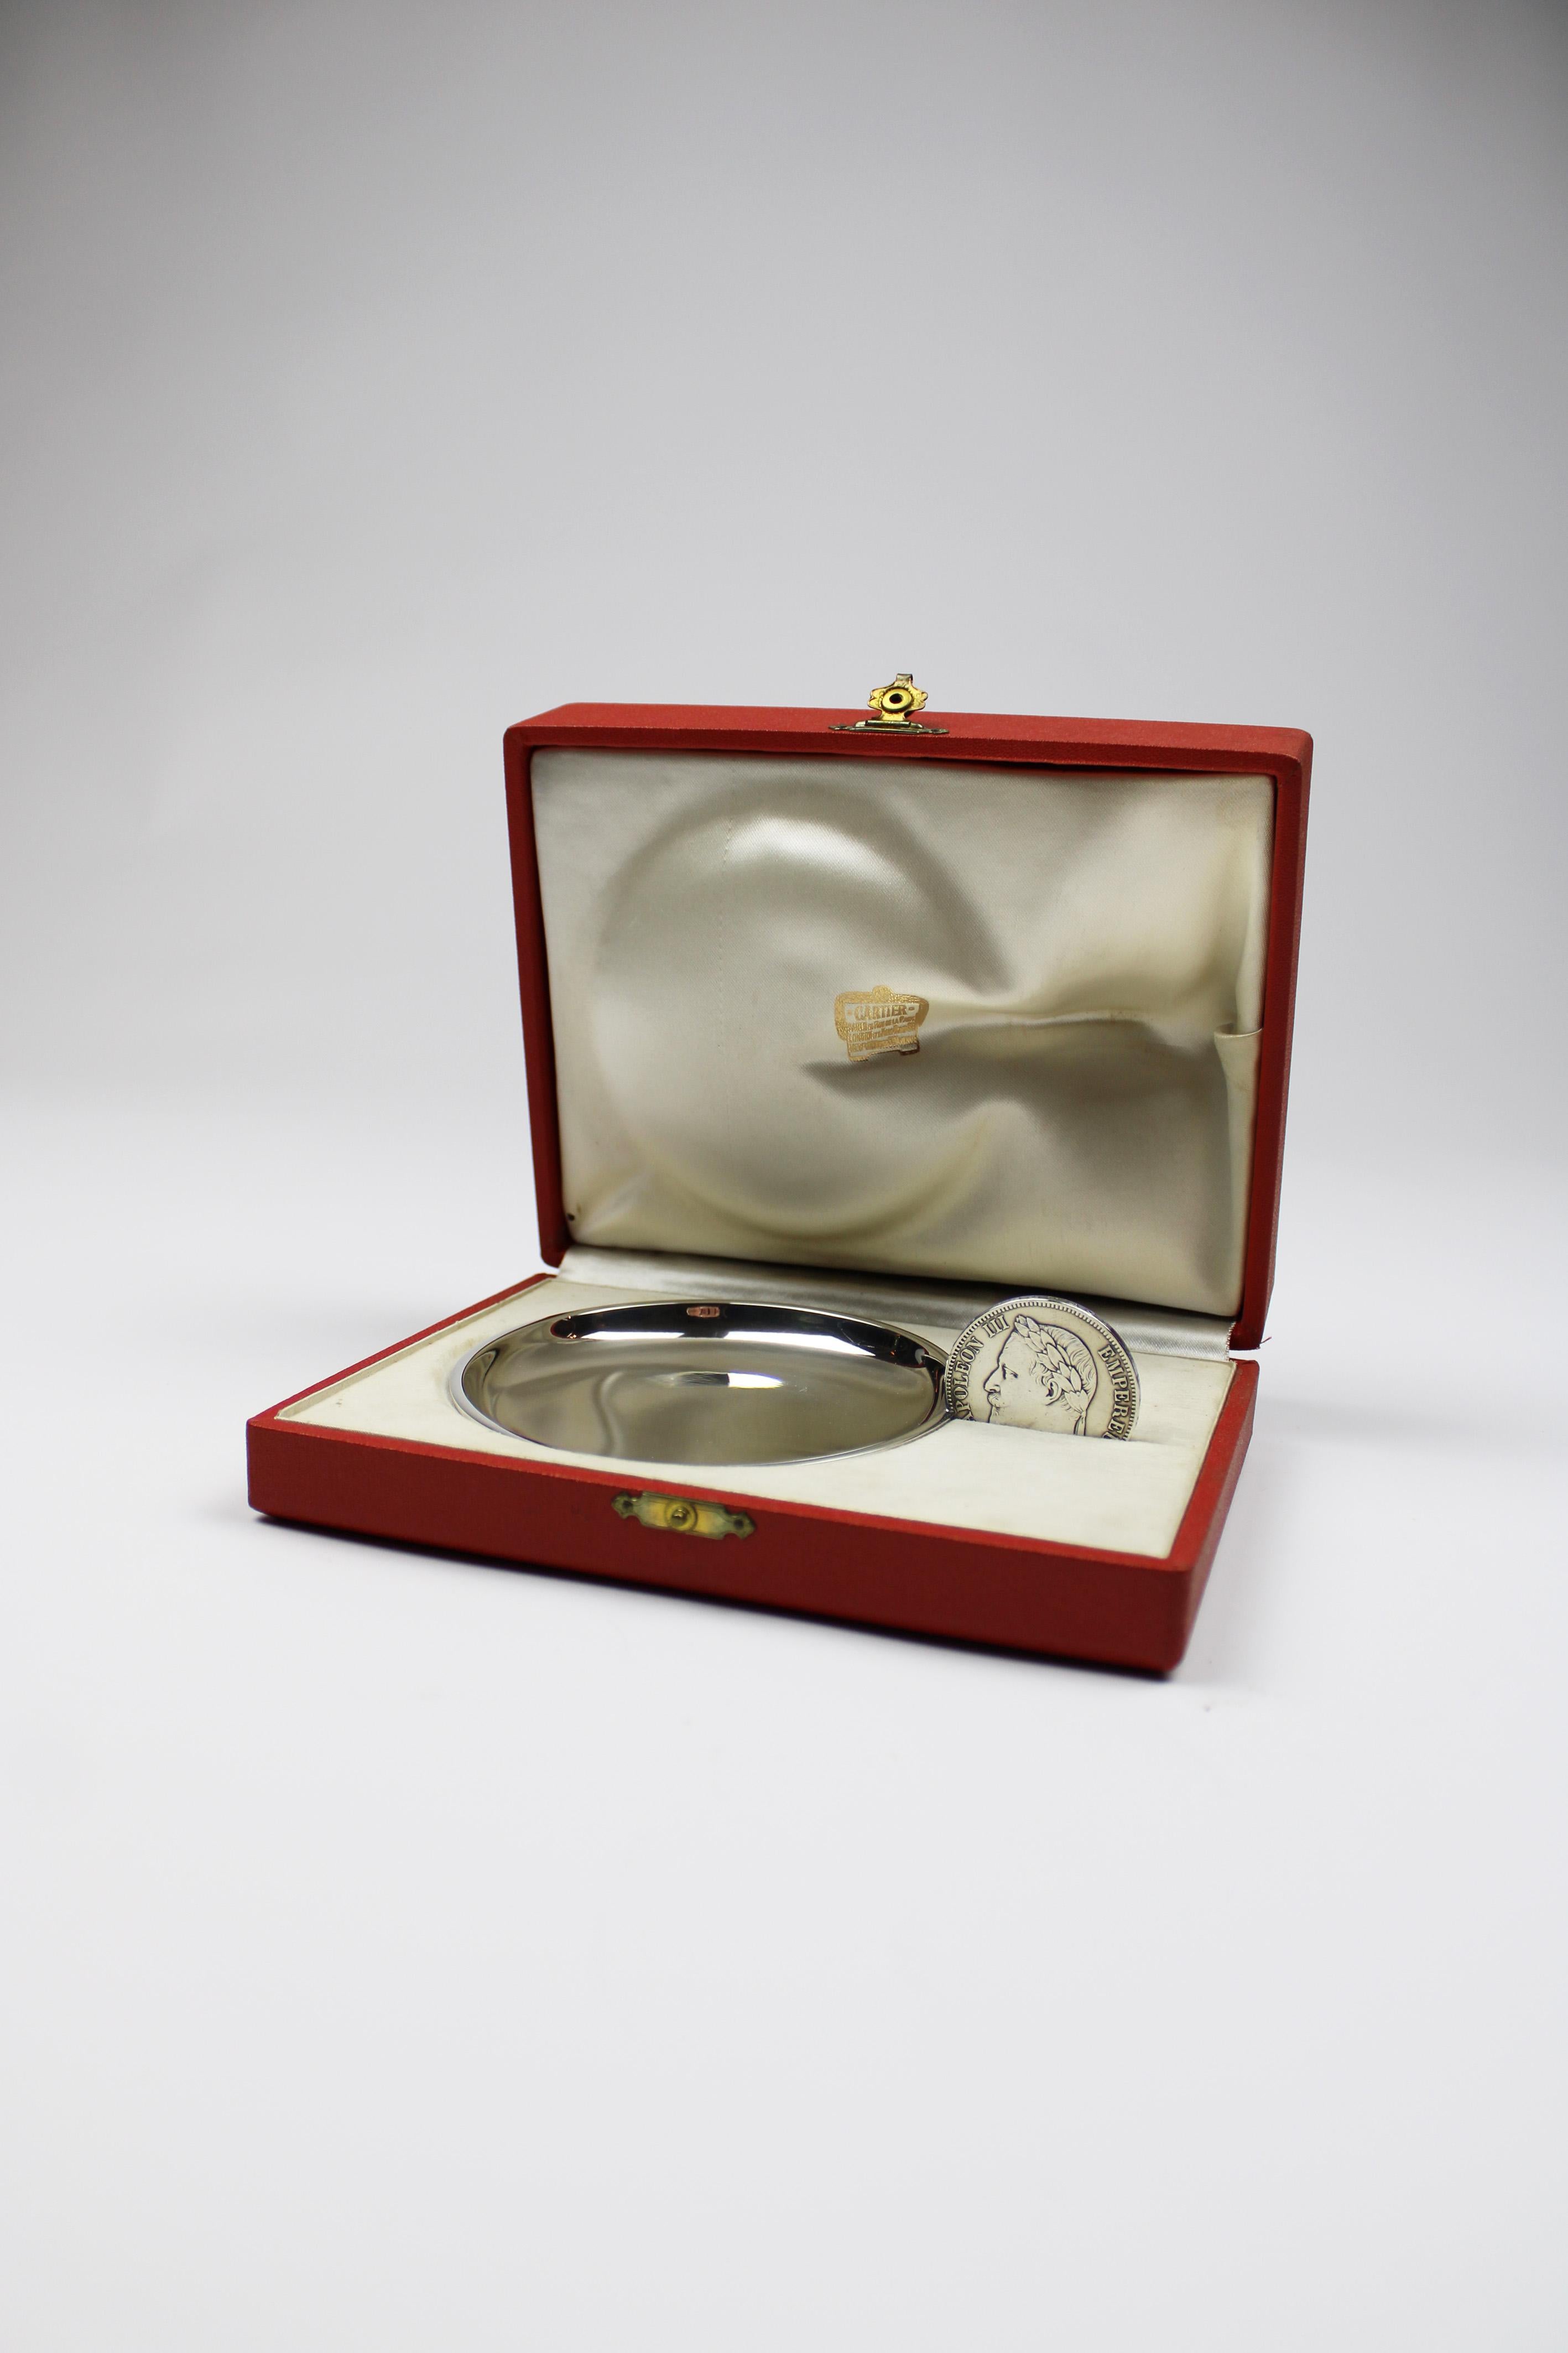 This rare silver Cartier wine taster also called a Tastevin is a display of the 20th-century luxury and design. To this day, Cartier is one of the major players within the refinement of diamonds, watches and other luxury objects. The fusion of the